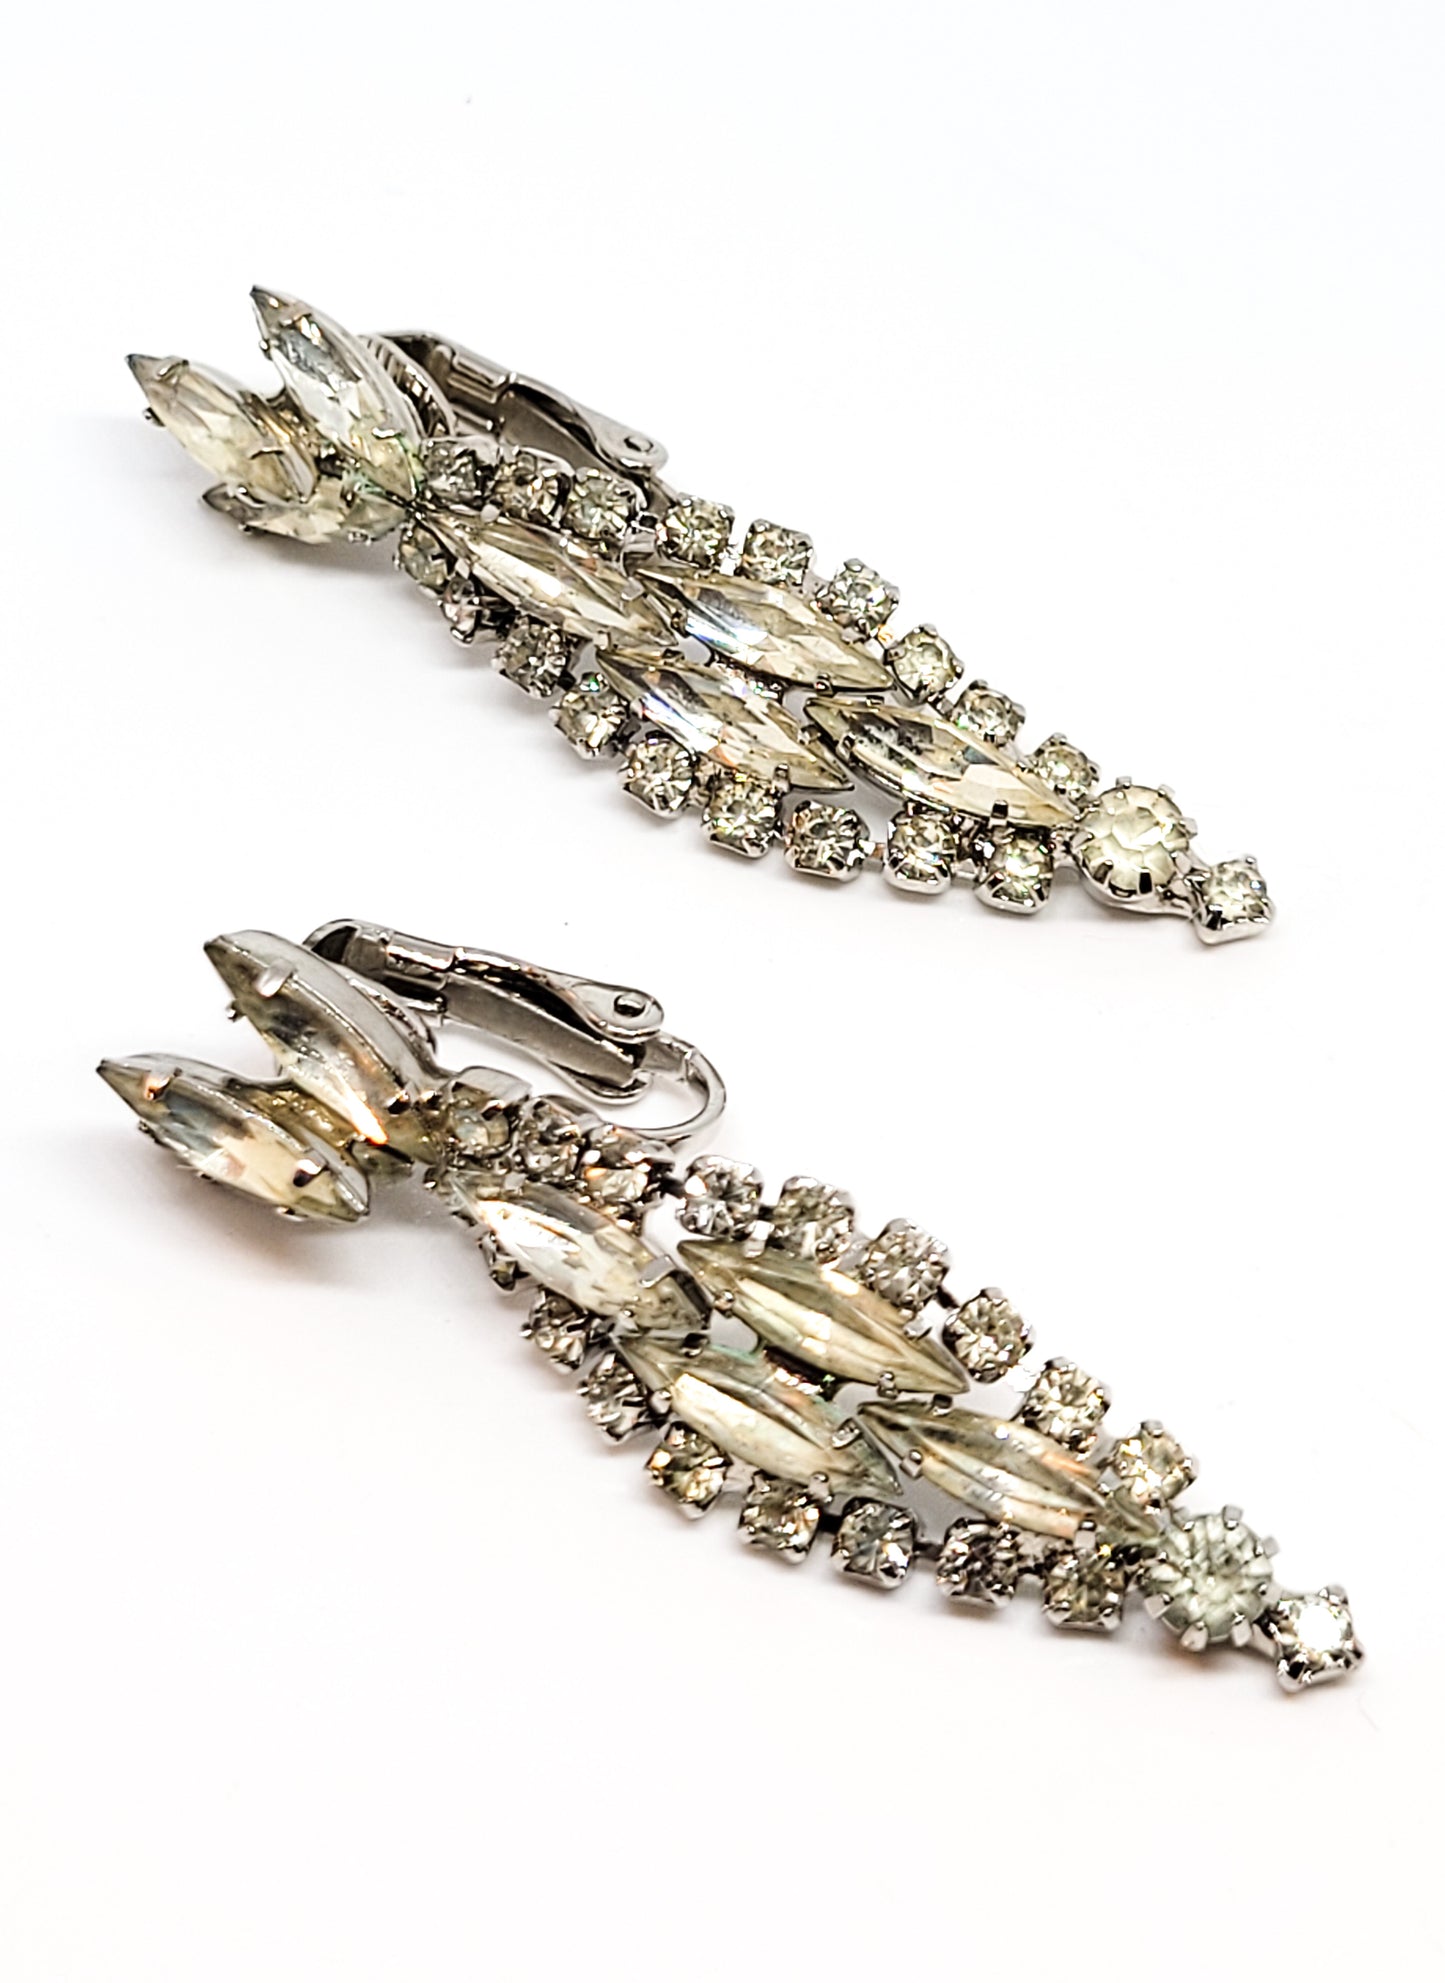 Stunning clear navette drop retro vintage clip on earrings mid century